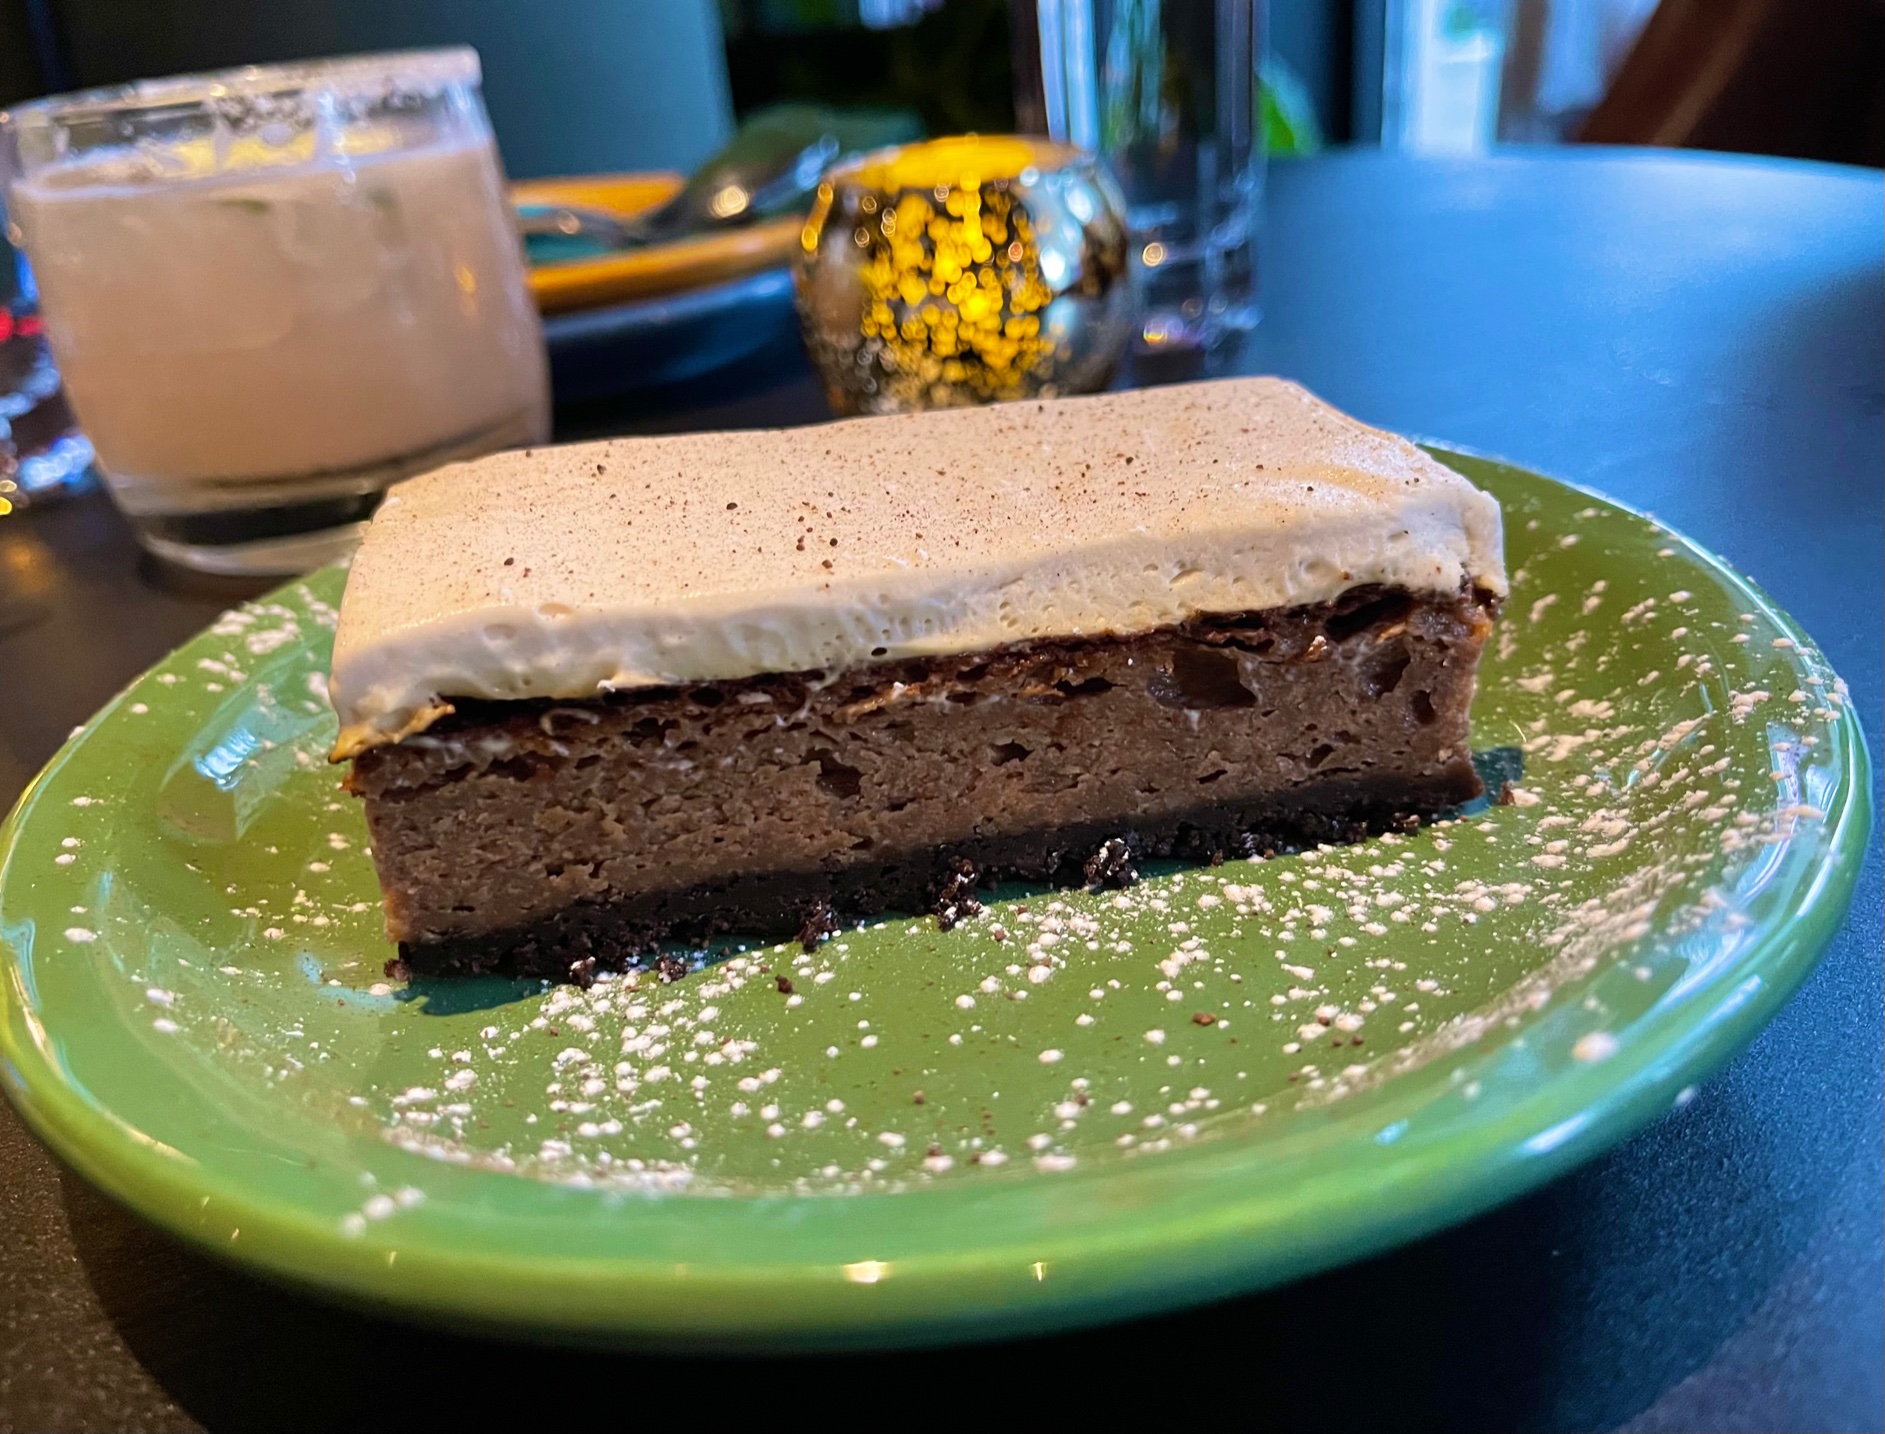 On a green plate, there is a Russian bar with layers of chocolate and a white frosting. Photo by Stephanie Wheatley.